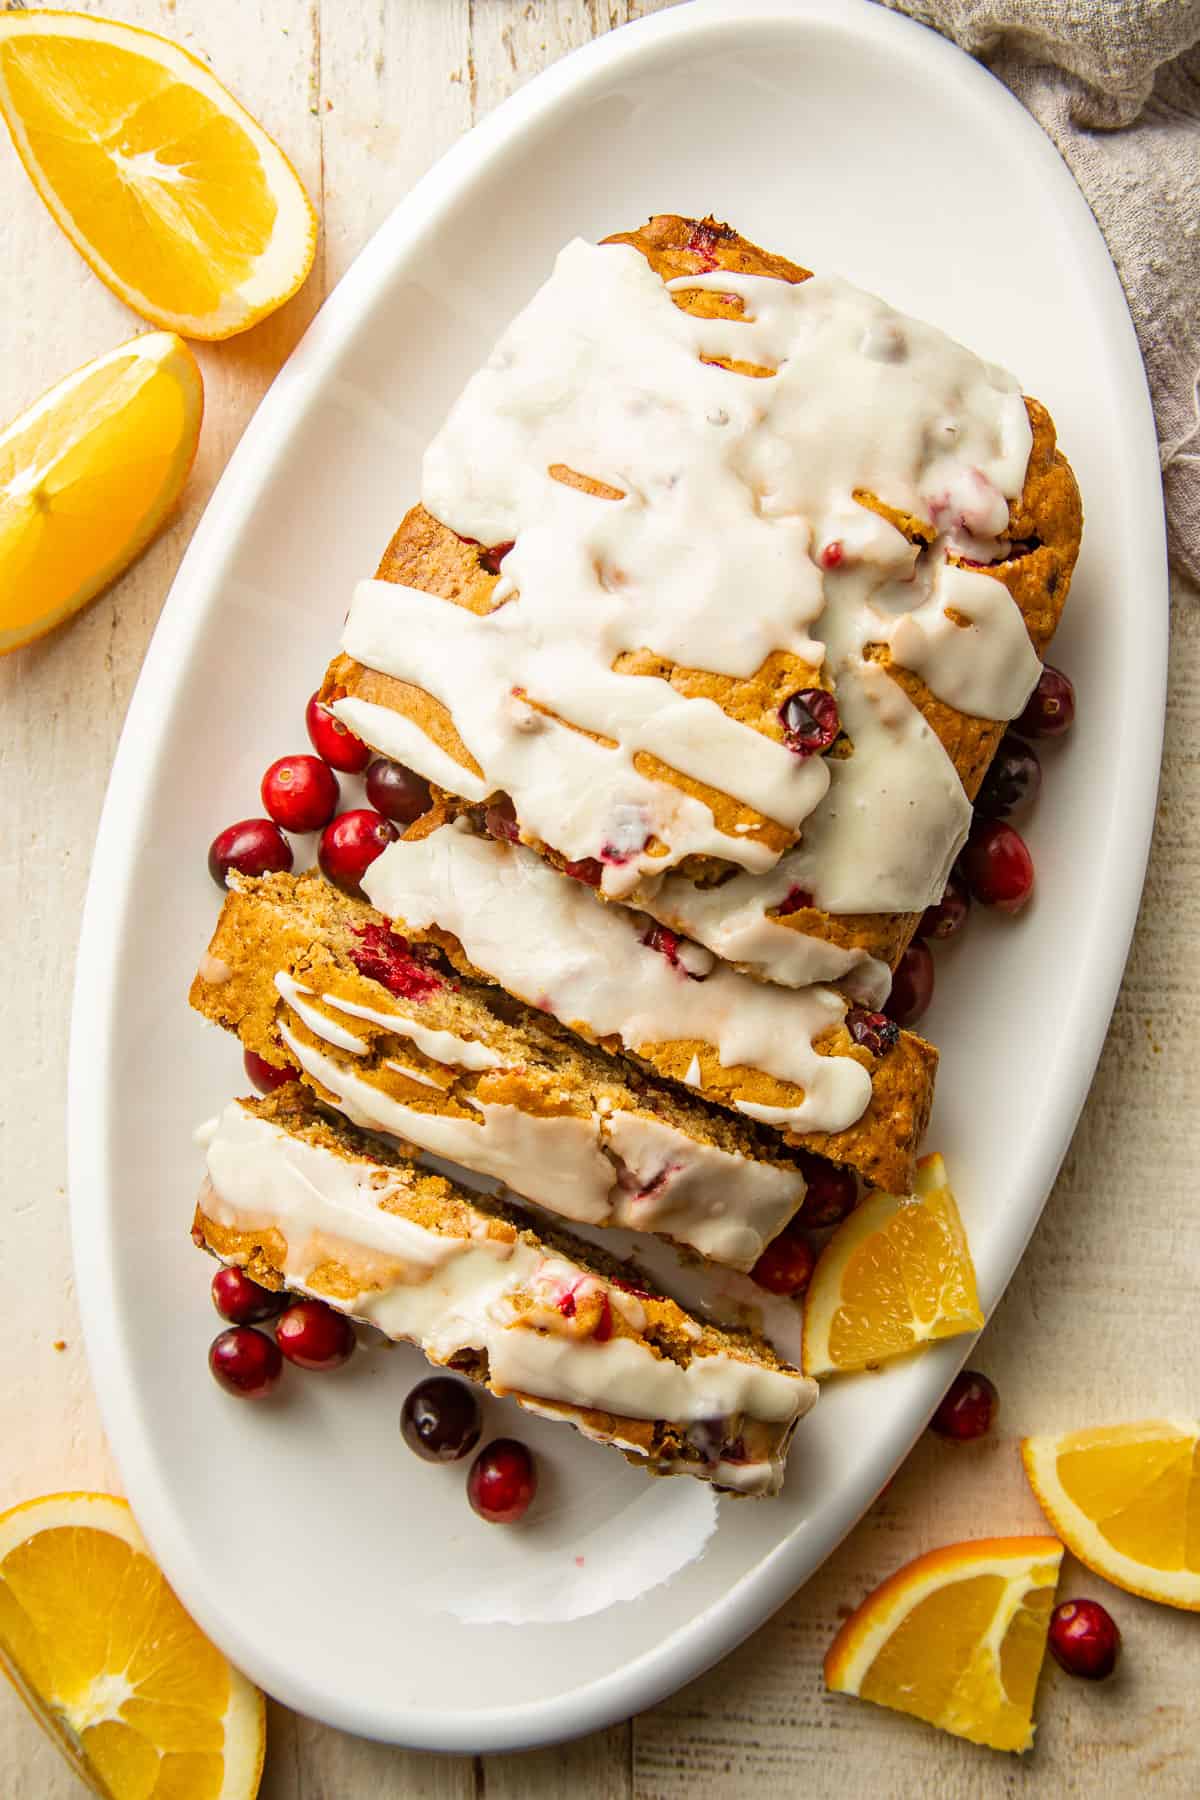 Overhead view of a loaf of Vegan Cranberry Bread with orange slices and fresh cranberries.